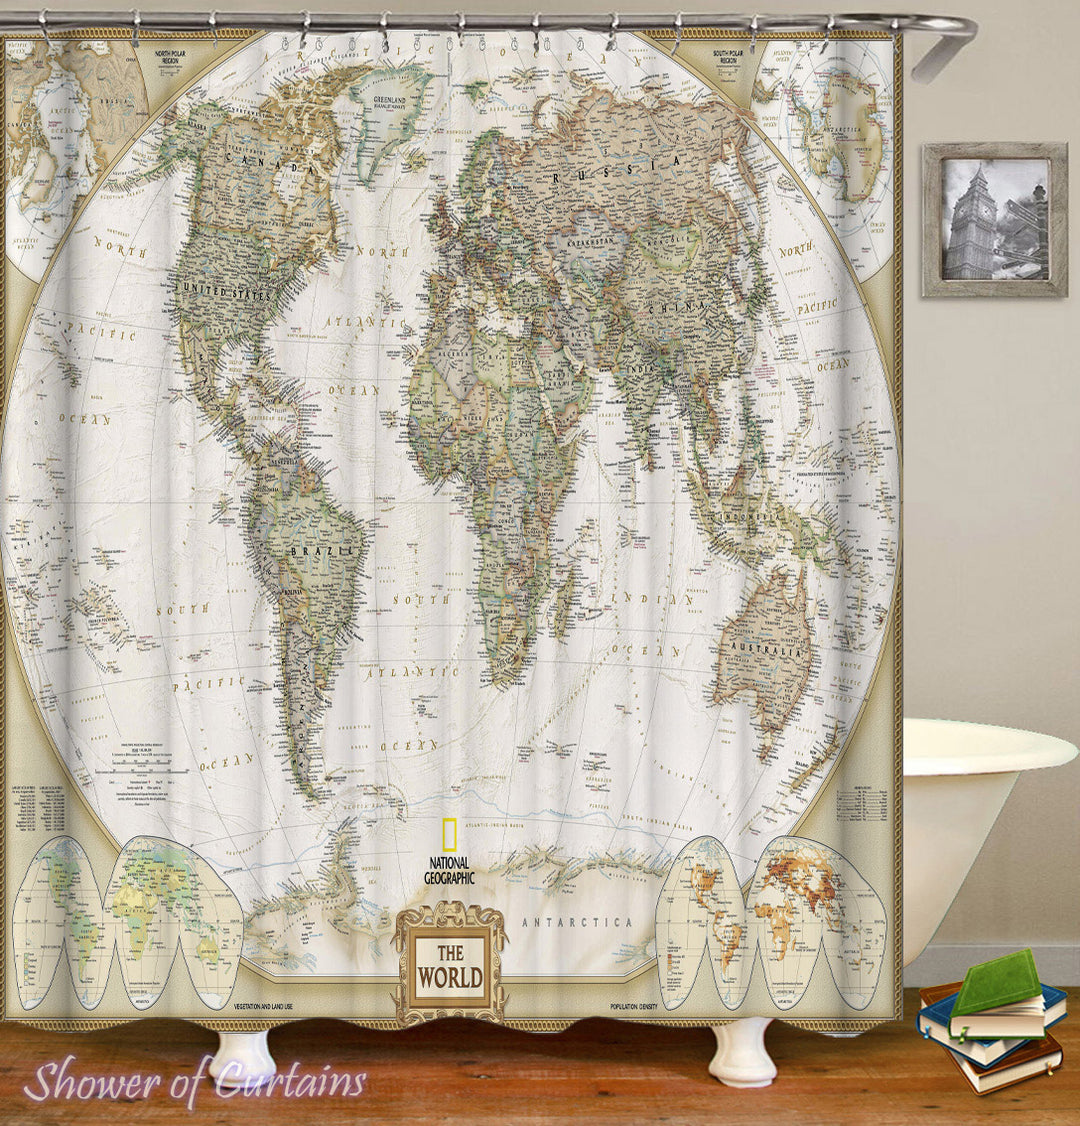 The World Map Shower Curtain